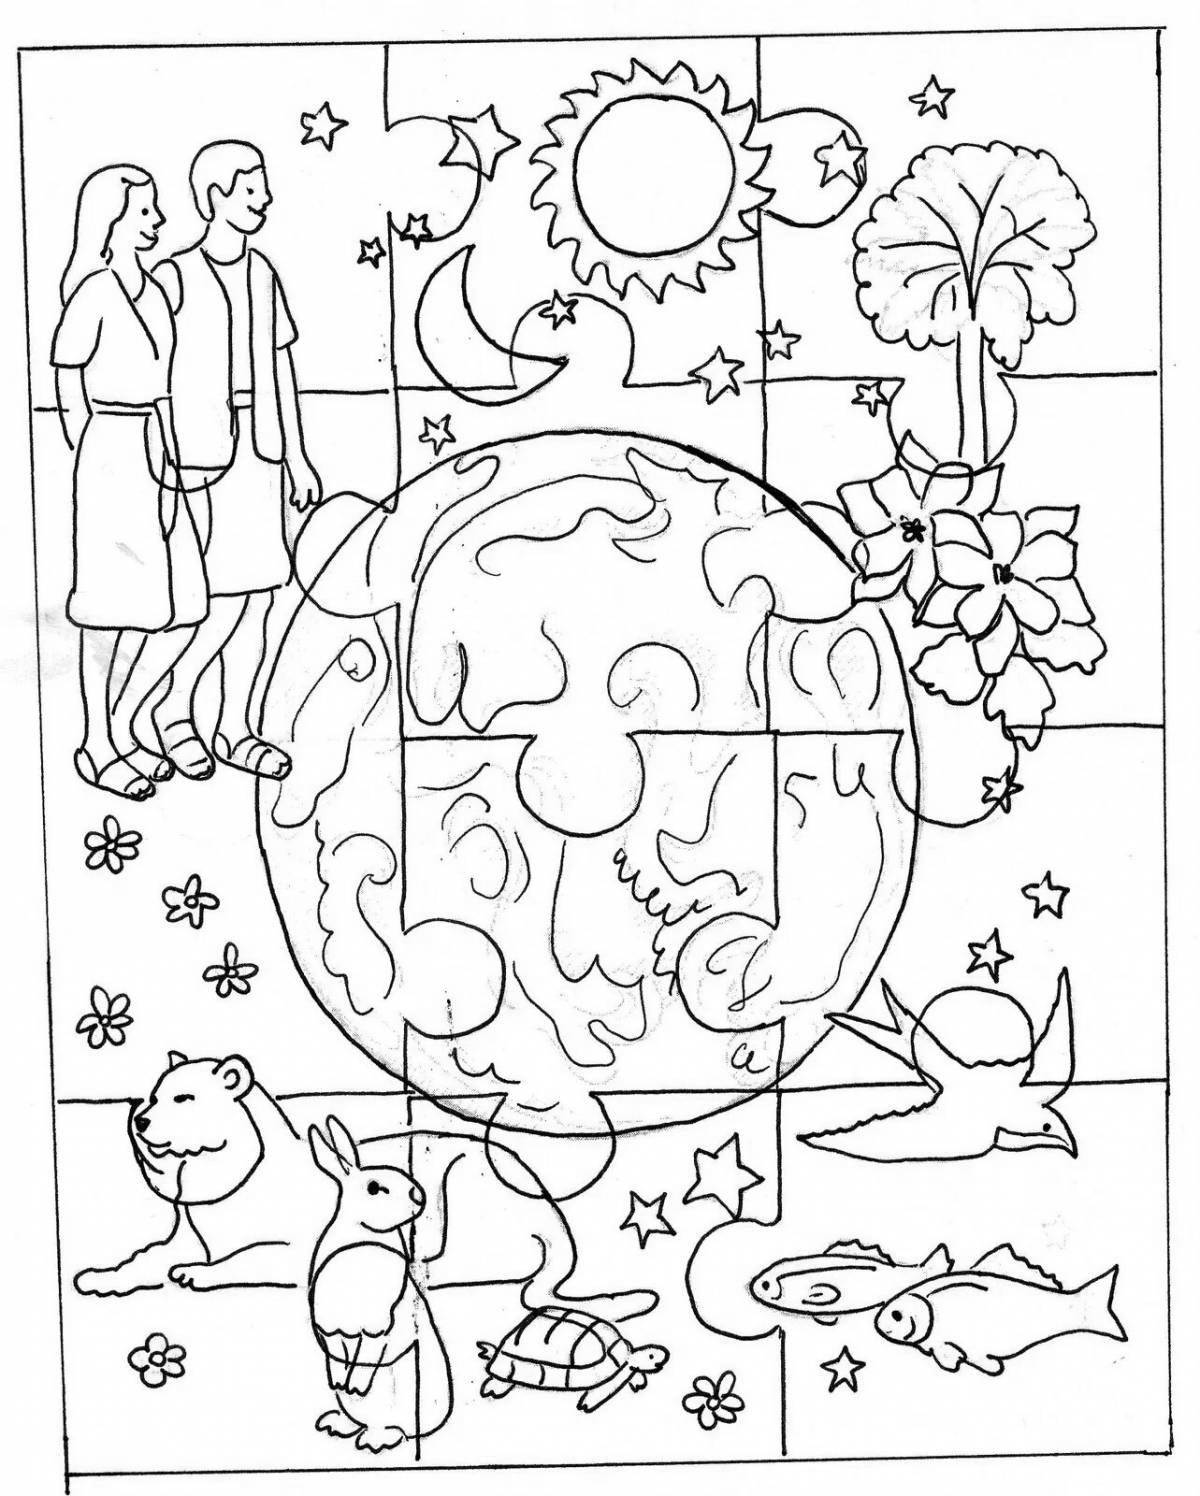 Coloring page glorious creation of the world